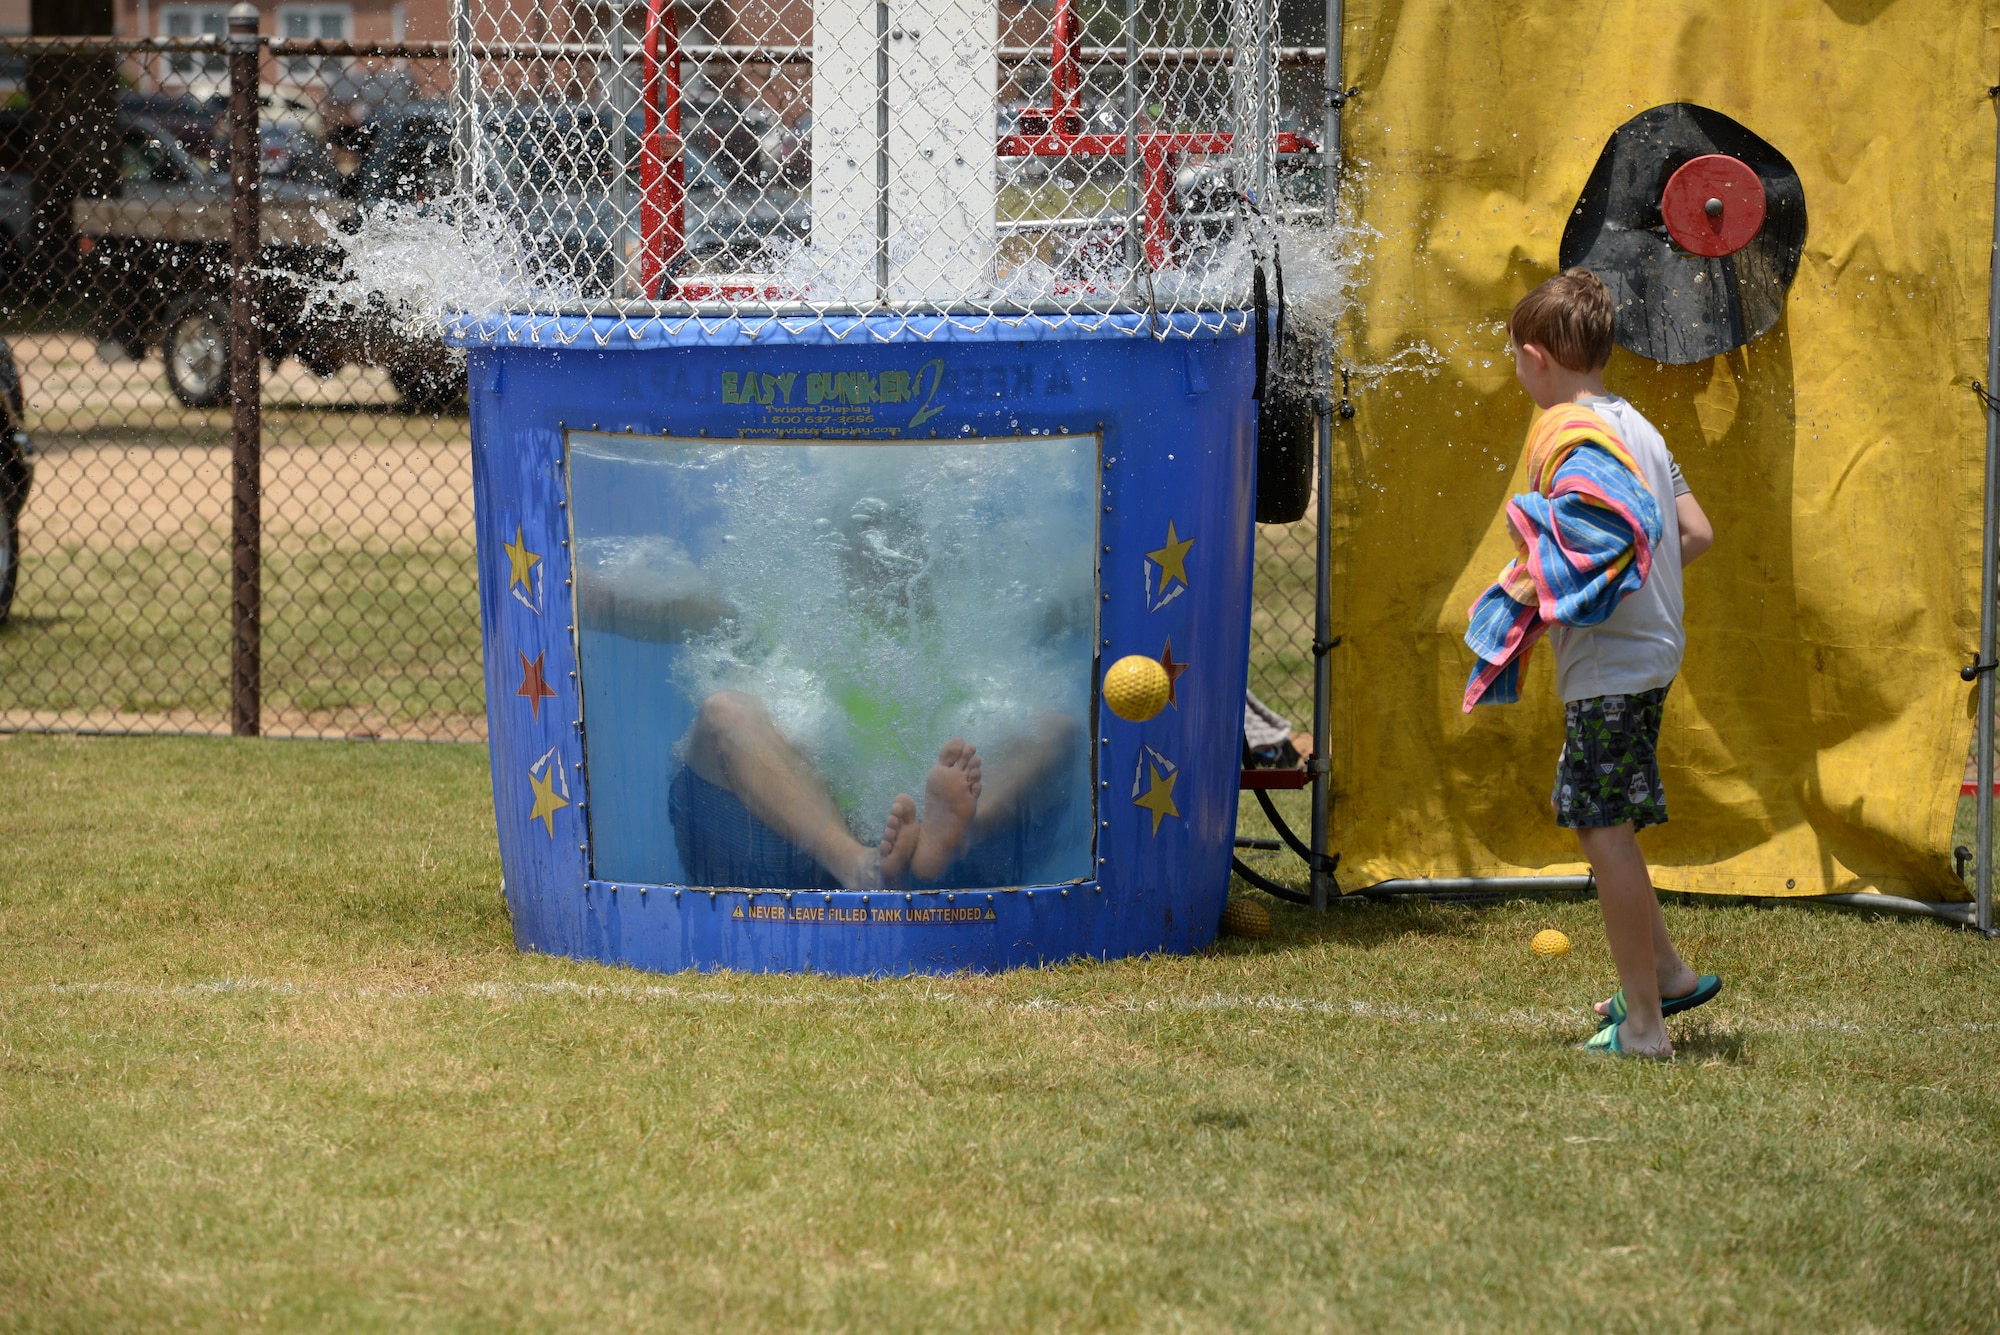 Airman 1st Class Spencer Hurlburt, 14th Operations Support Squadron Airfield Systems technician, drops into the dunk tank Aug. 4, 2017, on Columbus Air Force Base, Mississippi. Face painting, multiple inflatable water slides and a dunk tank were available at the End of Summer Bash, a family friendly event on Columbus AFB. (U.S. Air Force photo by Airman 1st Class Keith Holcomb)